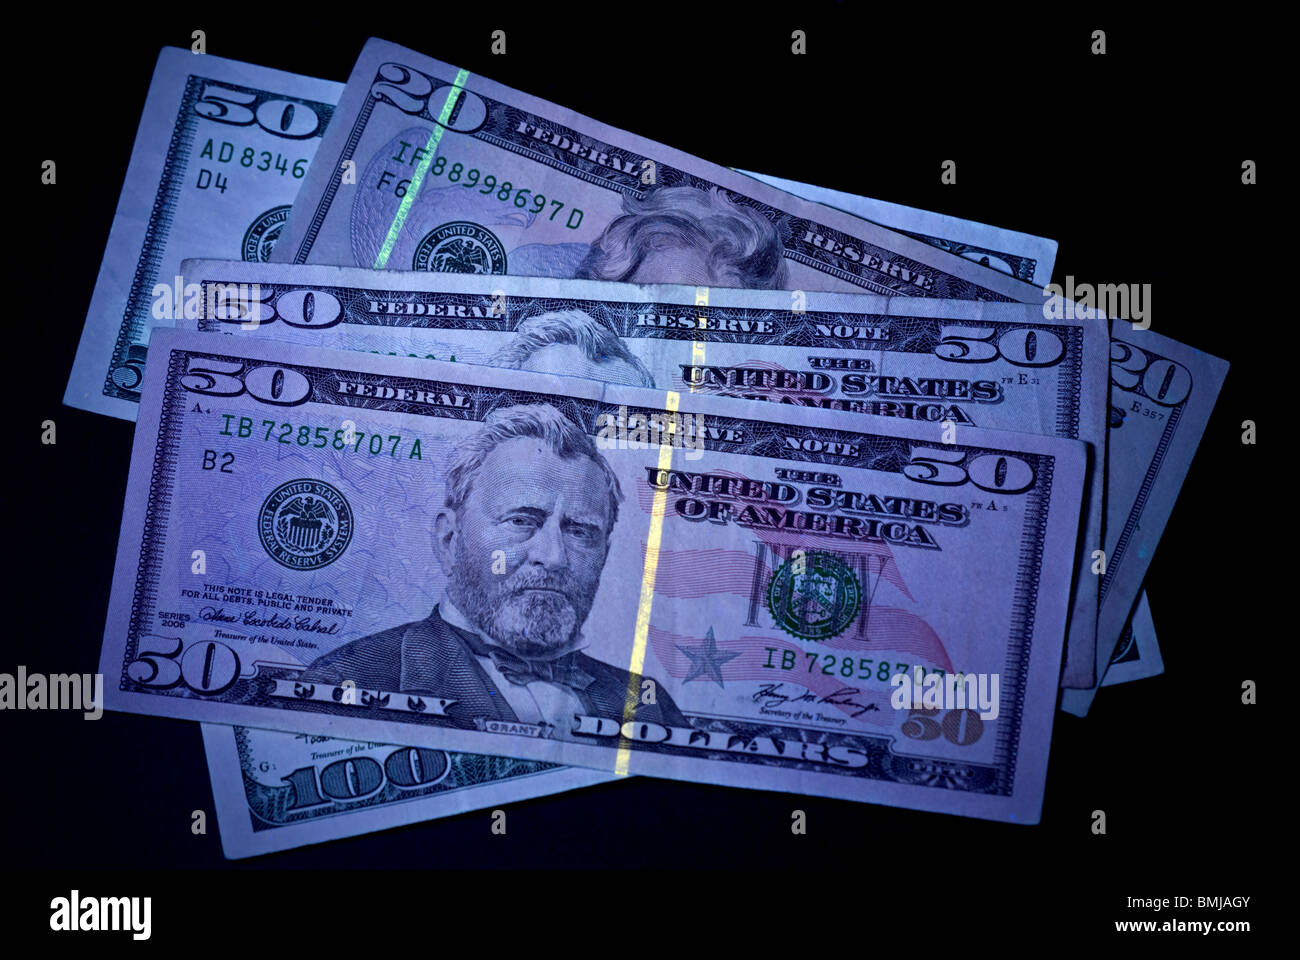 United States currency, under a UV light to show anti-counterfeit technology. Stock Photo